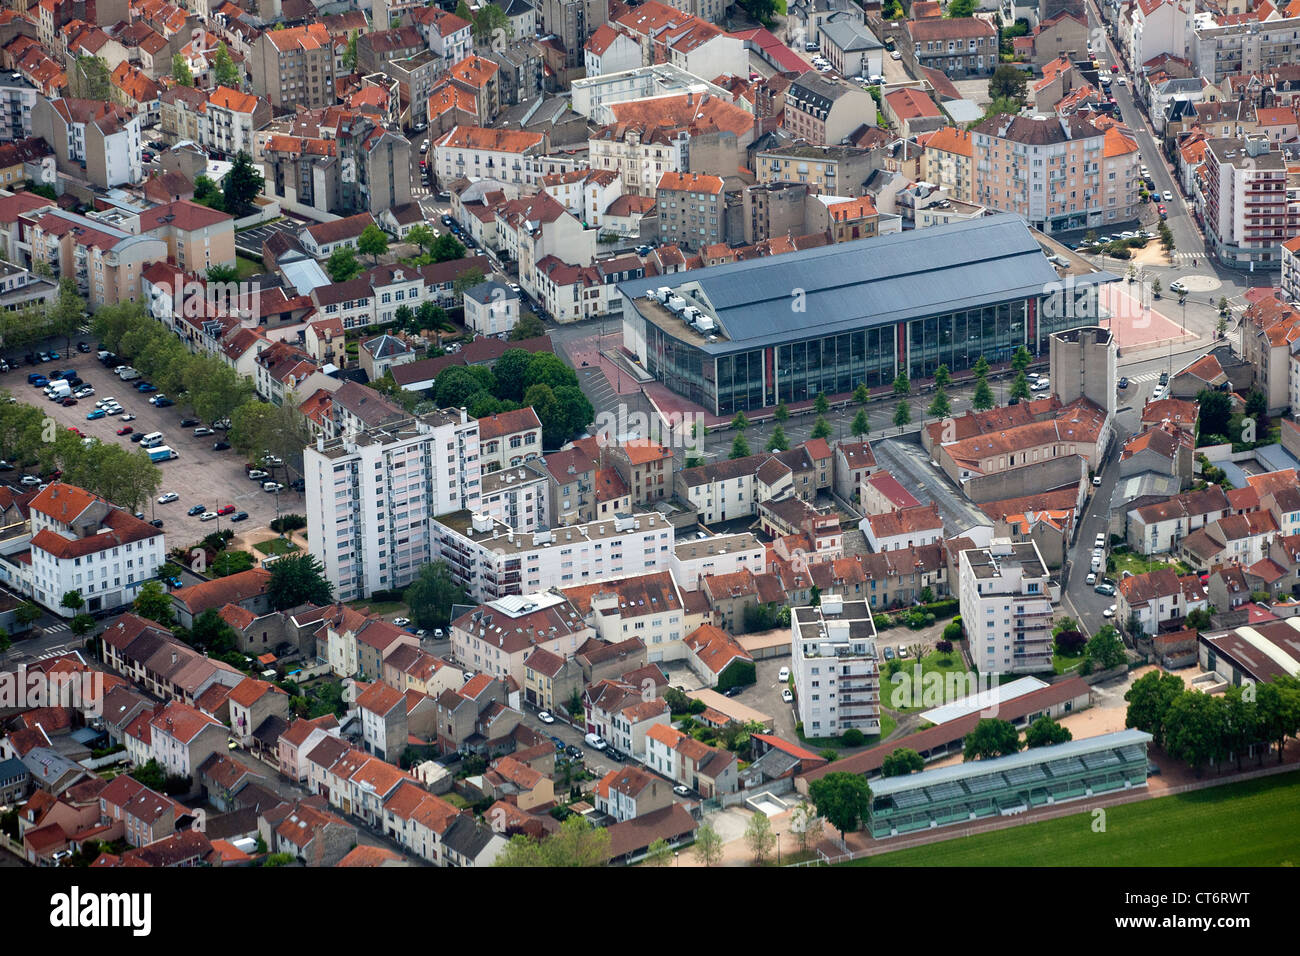 An aerial view of the Vichy covered market (Auvergne - France). Vichy from above. Stock Photo